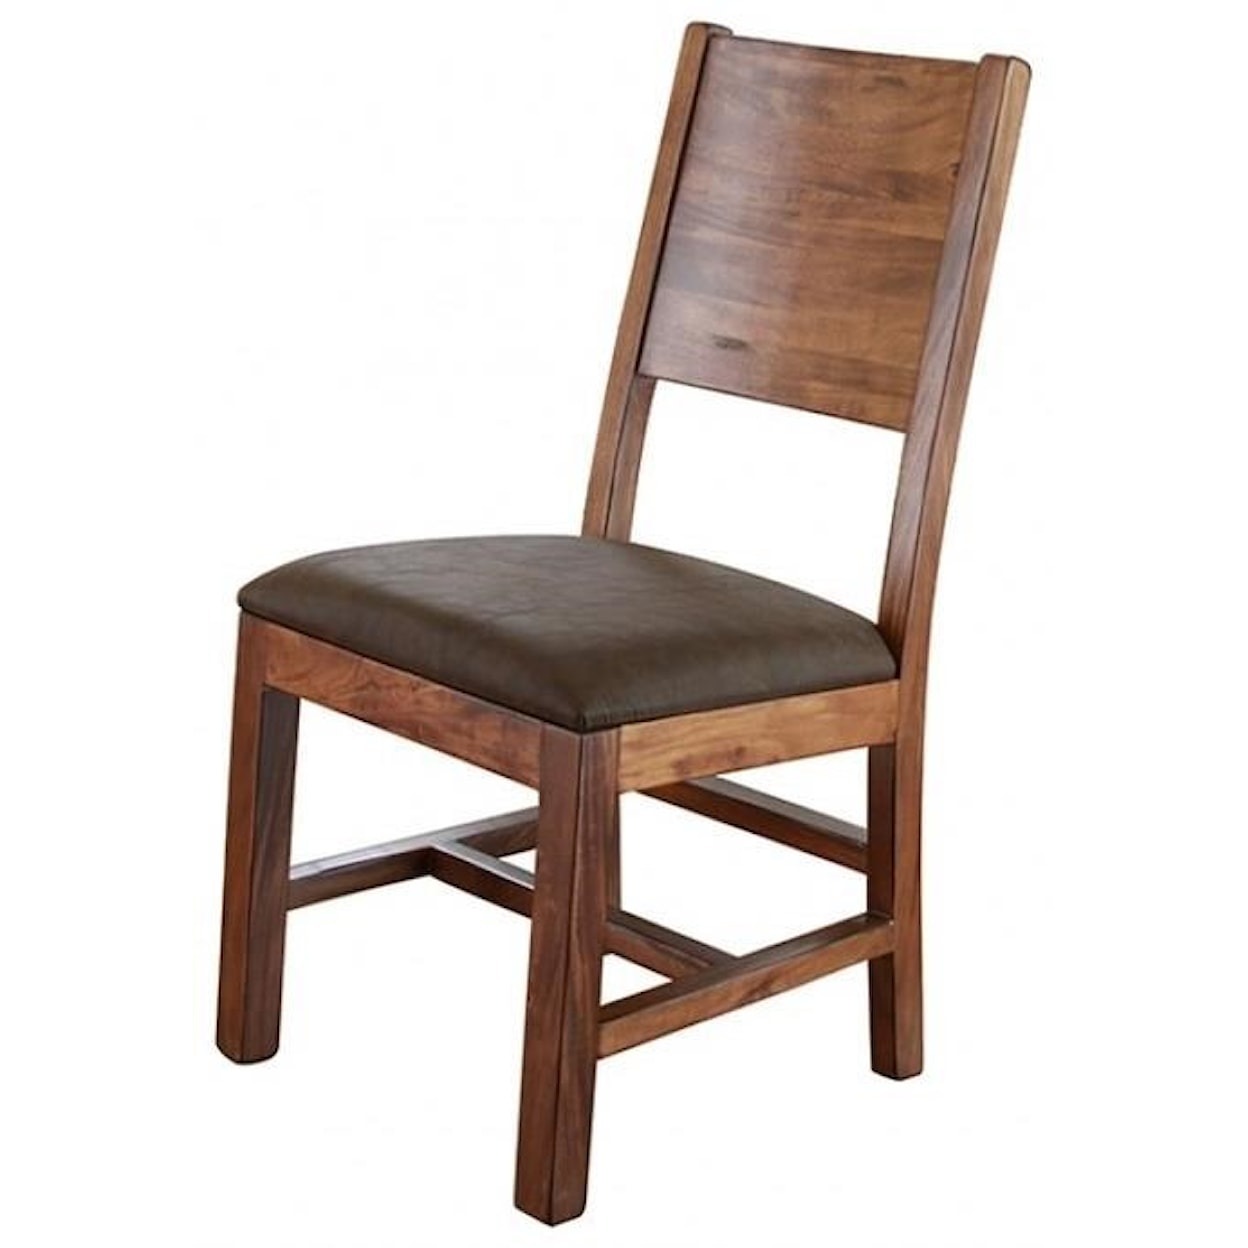 IFD International Furniture Direct Parota Chair with Solid Wood Back